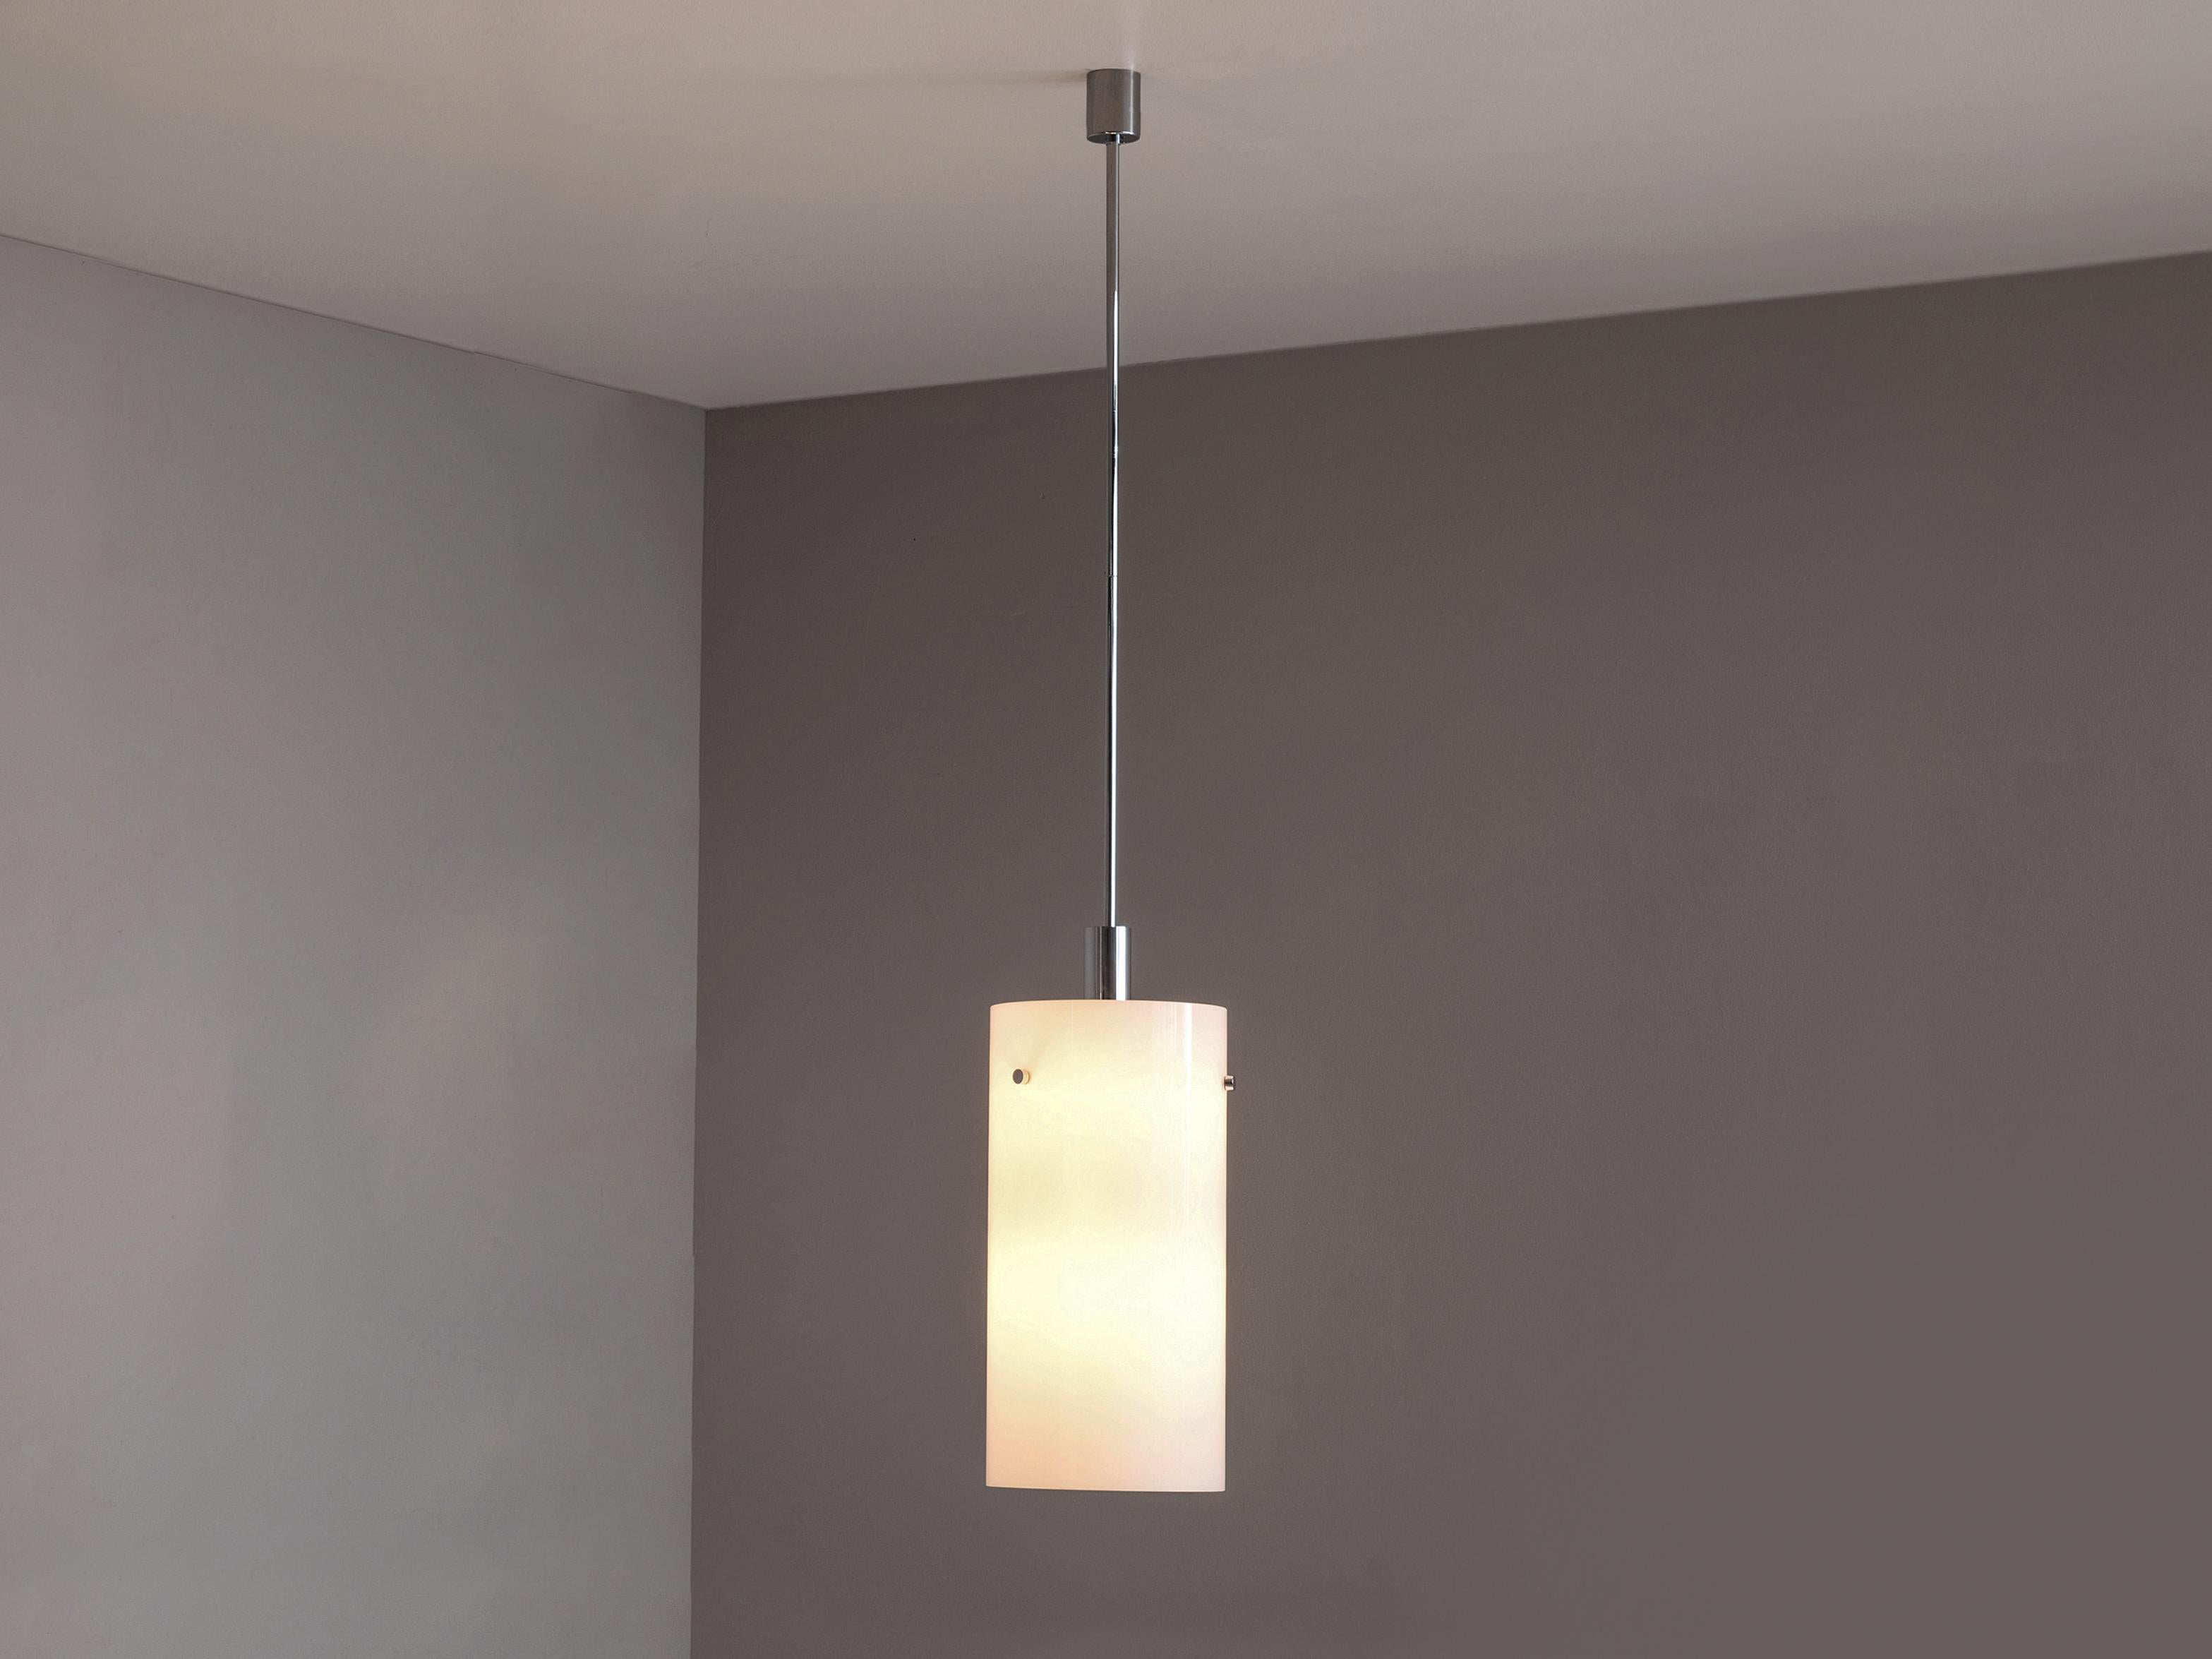 Pendant, metal, glass, Europe, 1970s

This atmospheric pendant is cylindrically shaped and executed in white glass, which results in a nice soft light-tone creating a lively ambience in the room. The fixture is based on a minimalist design made of